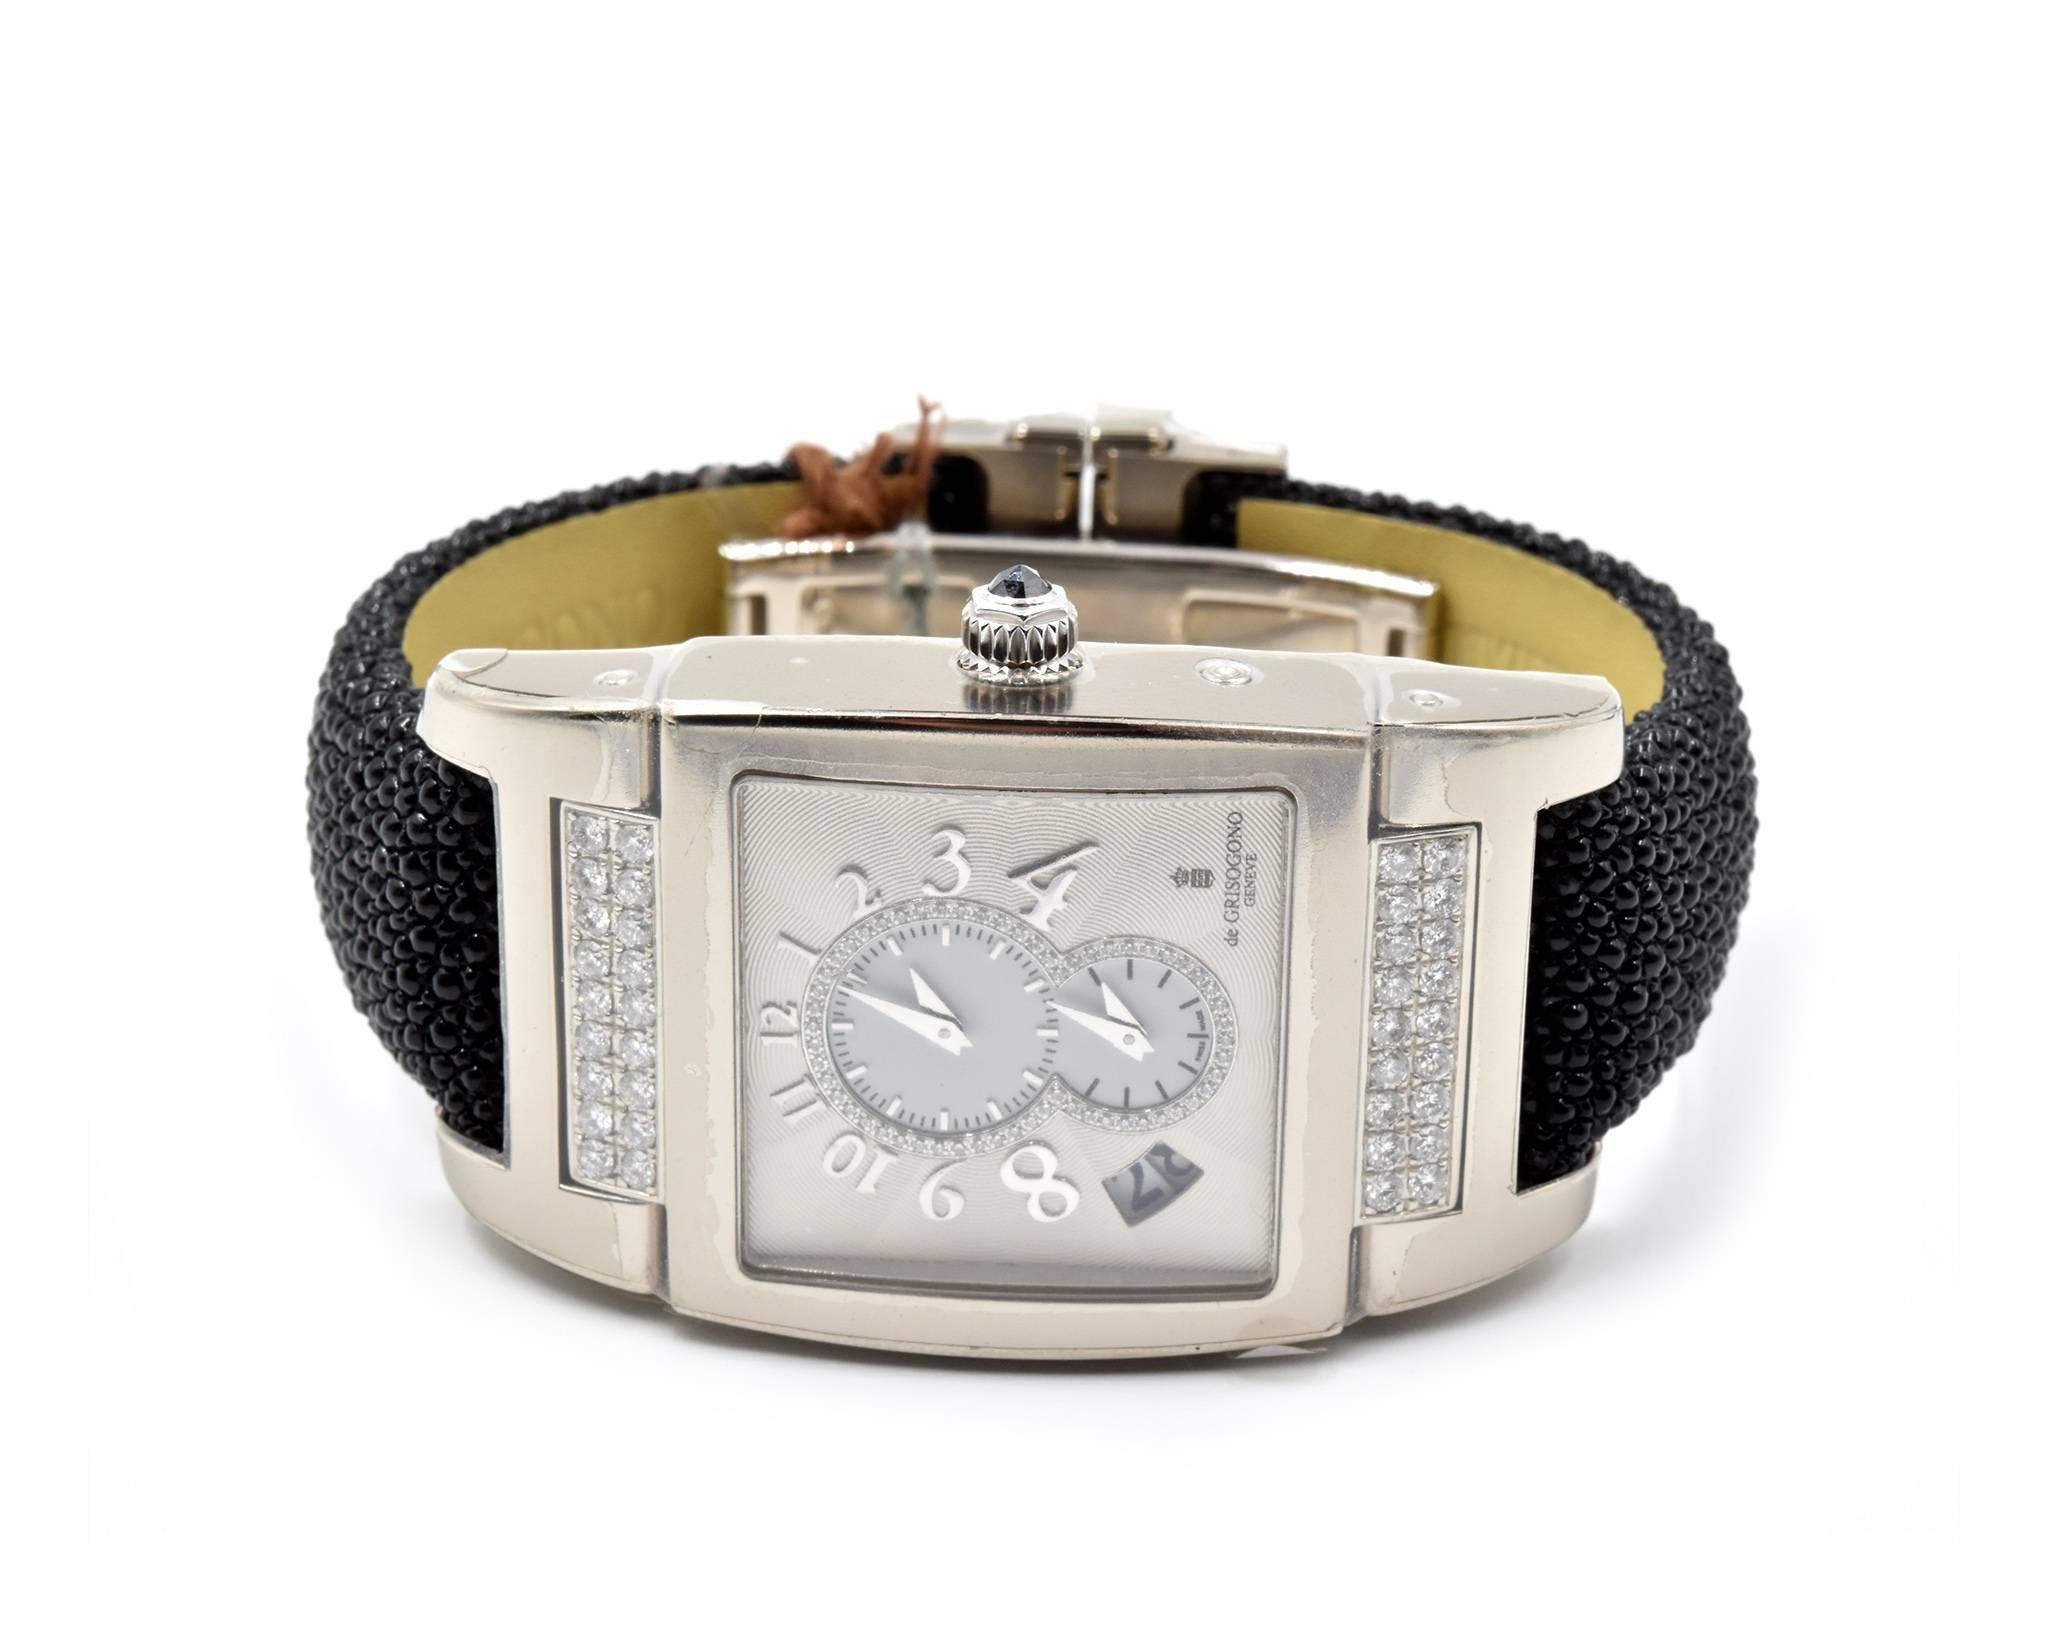 Movement: mechanical 21 jewels automatic winding
Function: hours, minutes, grand date, power reserve 42 hours, 2nd time zone
Case: rectangular 37.5mm x 56.6mm 18k white gold case set with 36 diamonds, sapphire protective crystal, water resistant to